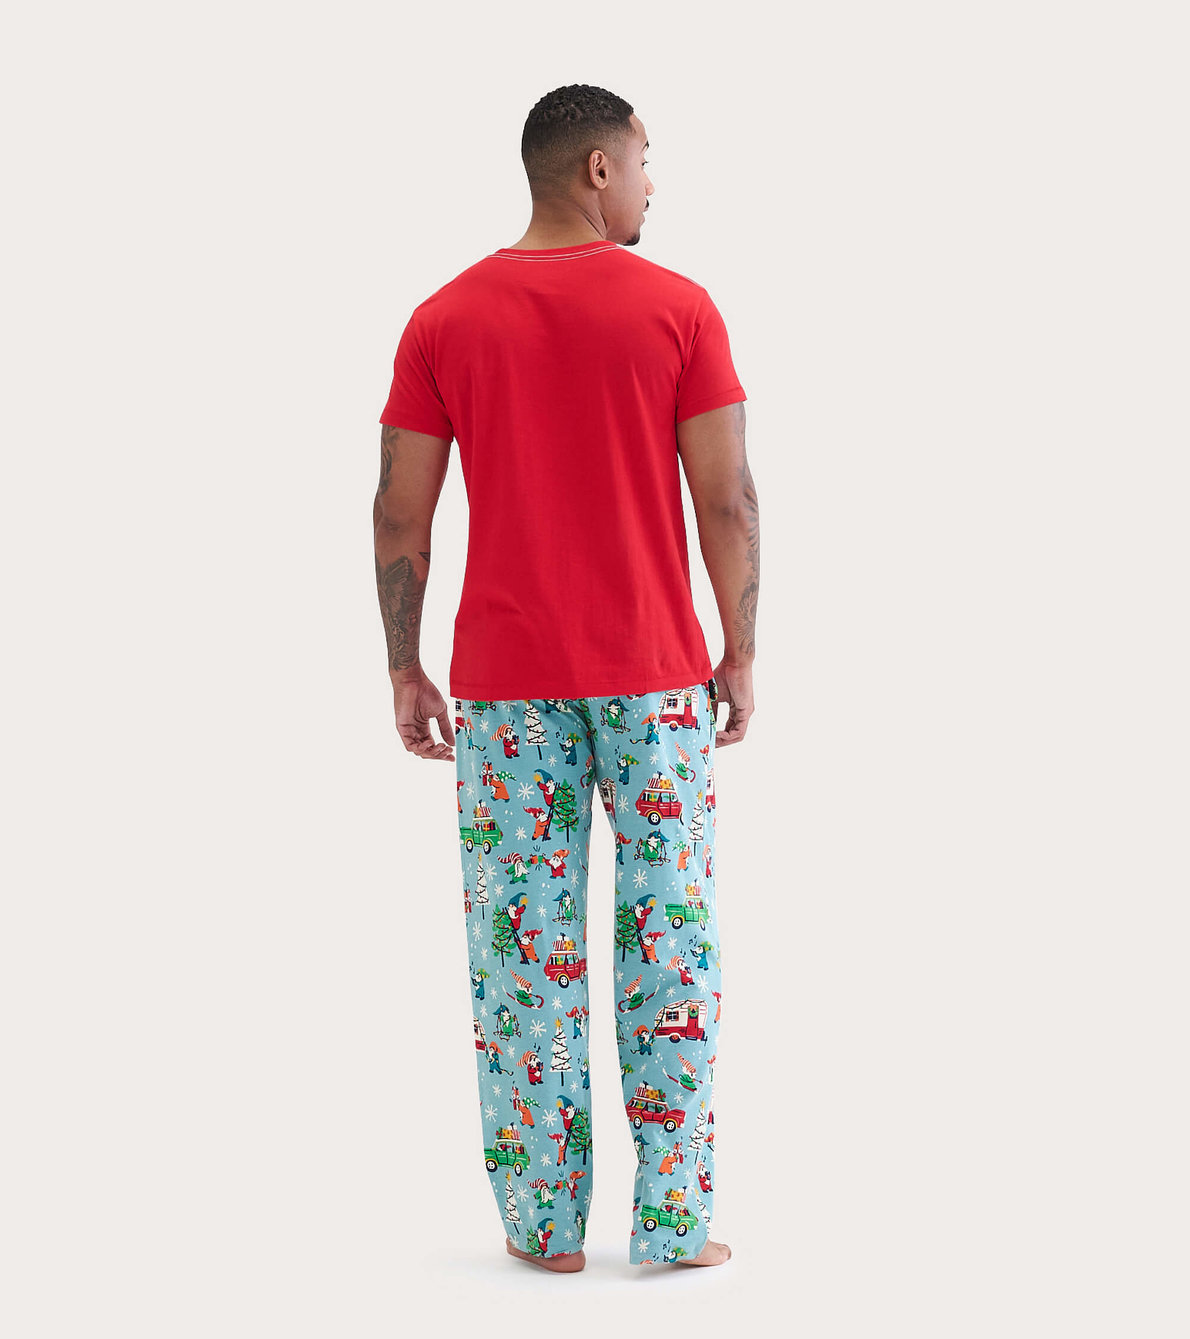 View larger image of Men's Gnome For The Holidays Jersey Pajama Pants